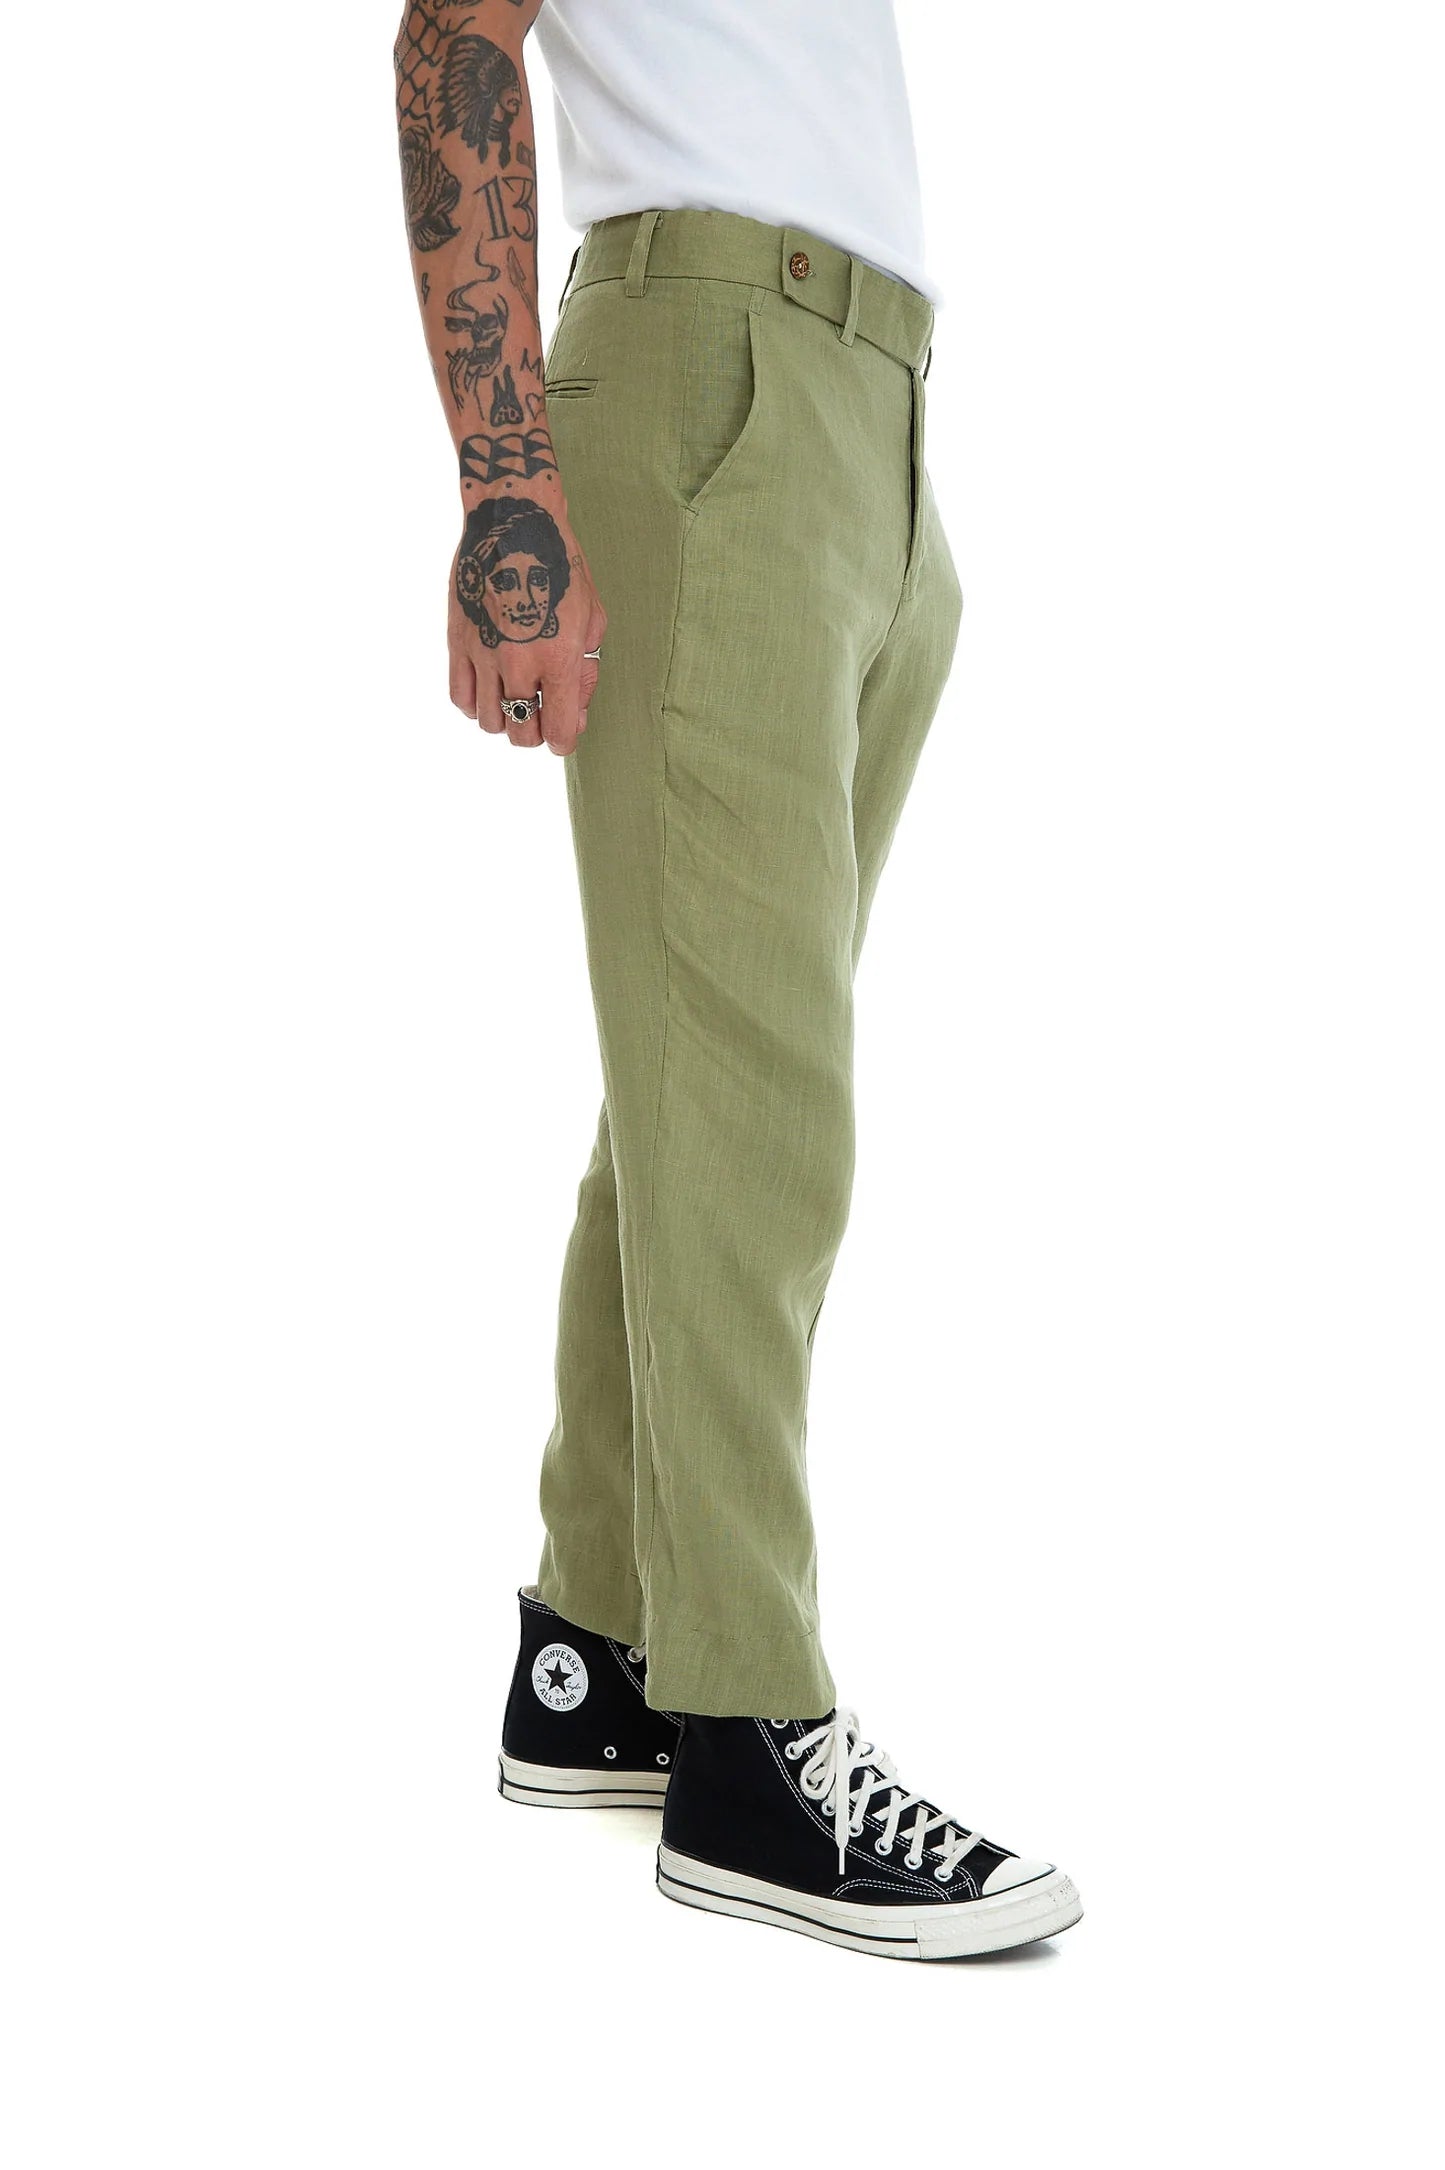 LOST IN NOWHERE / WAIHEKE LINEN PANT